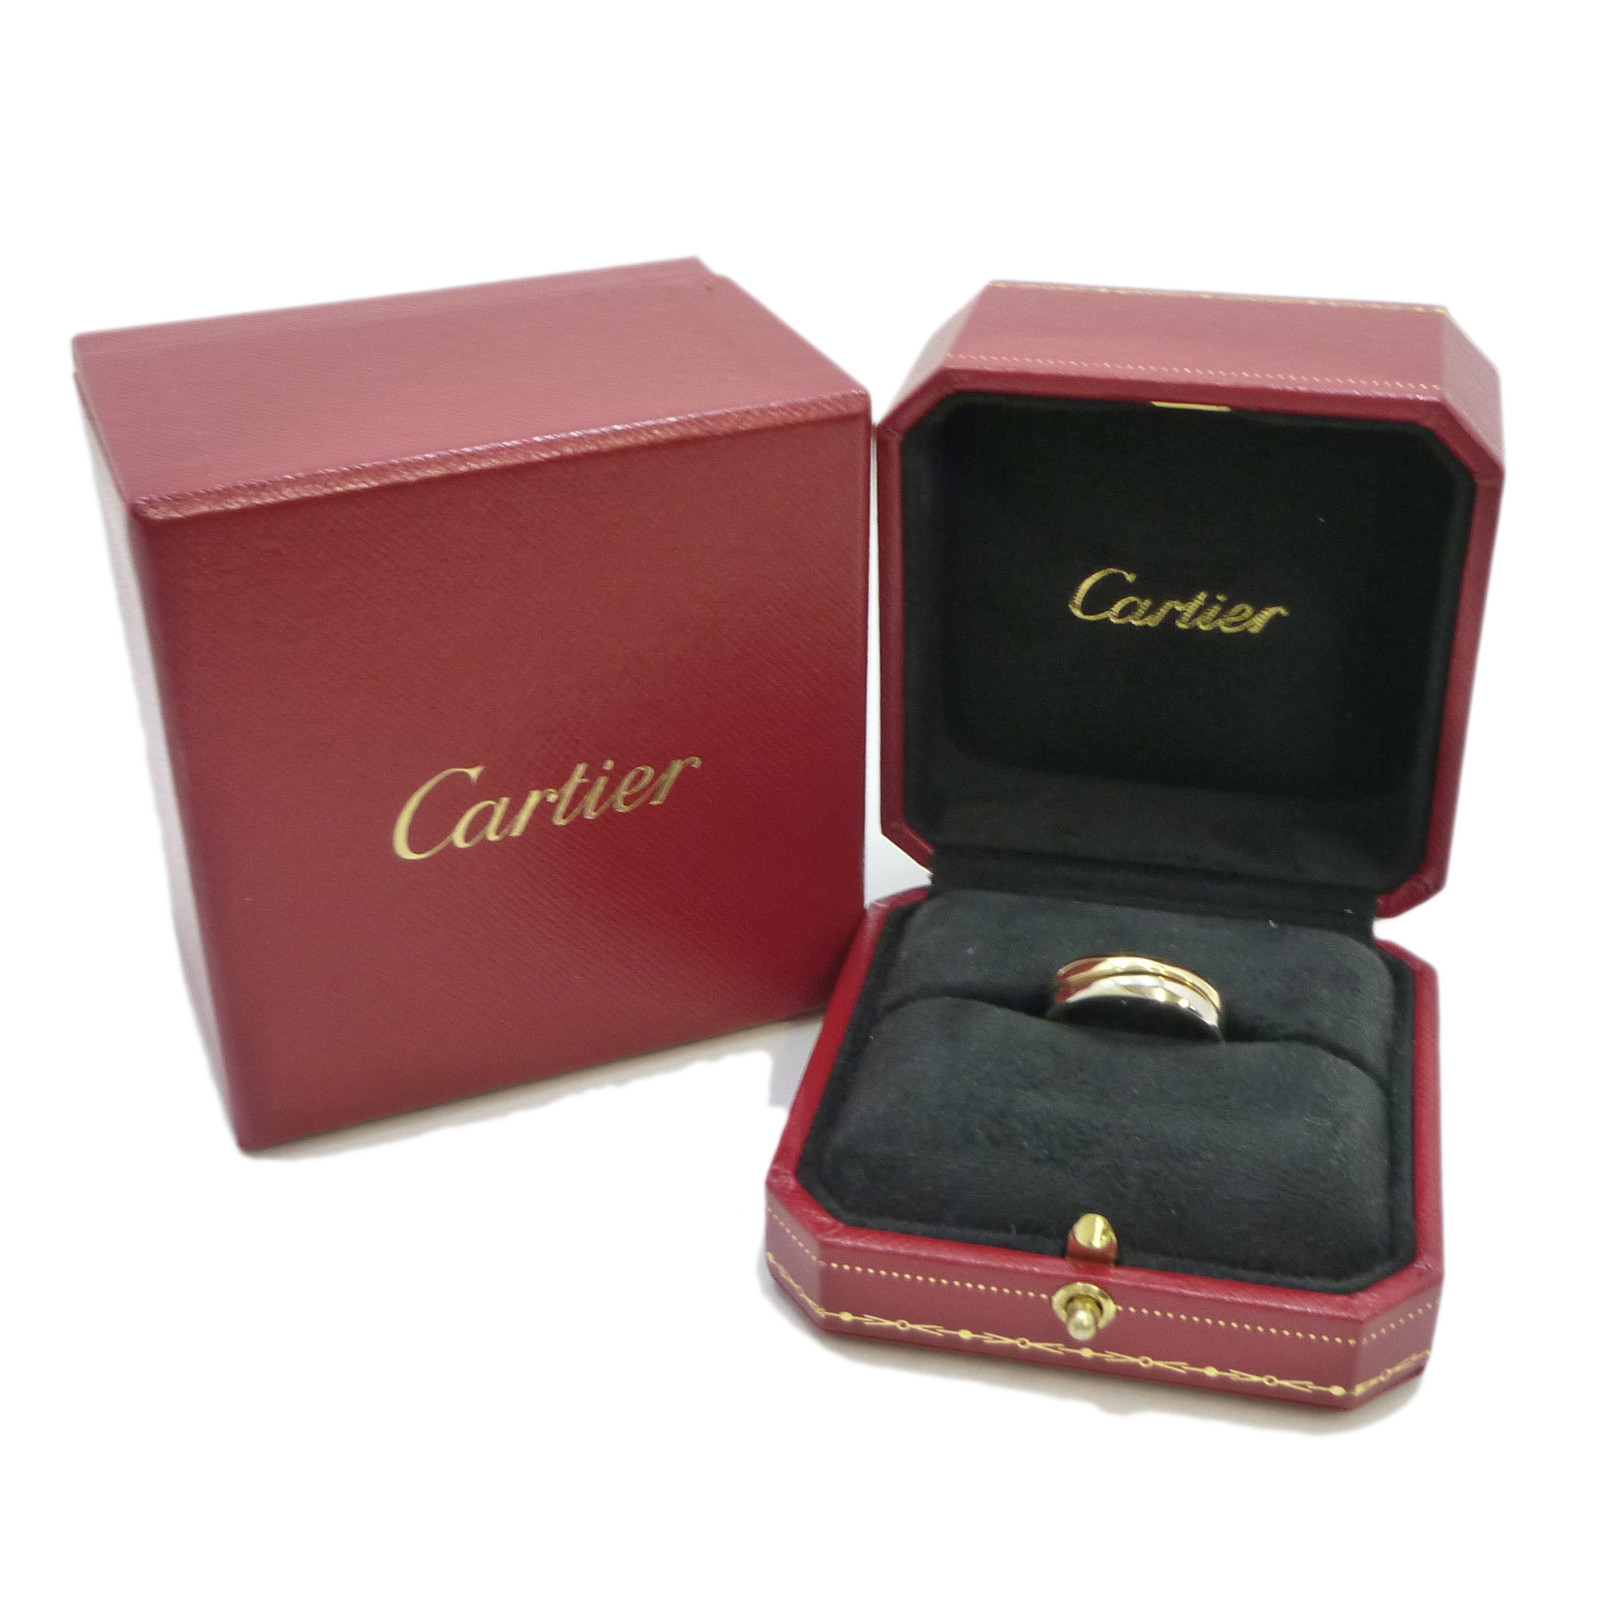 cartier about us